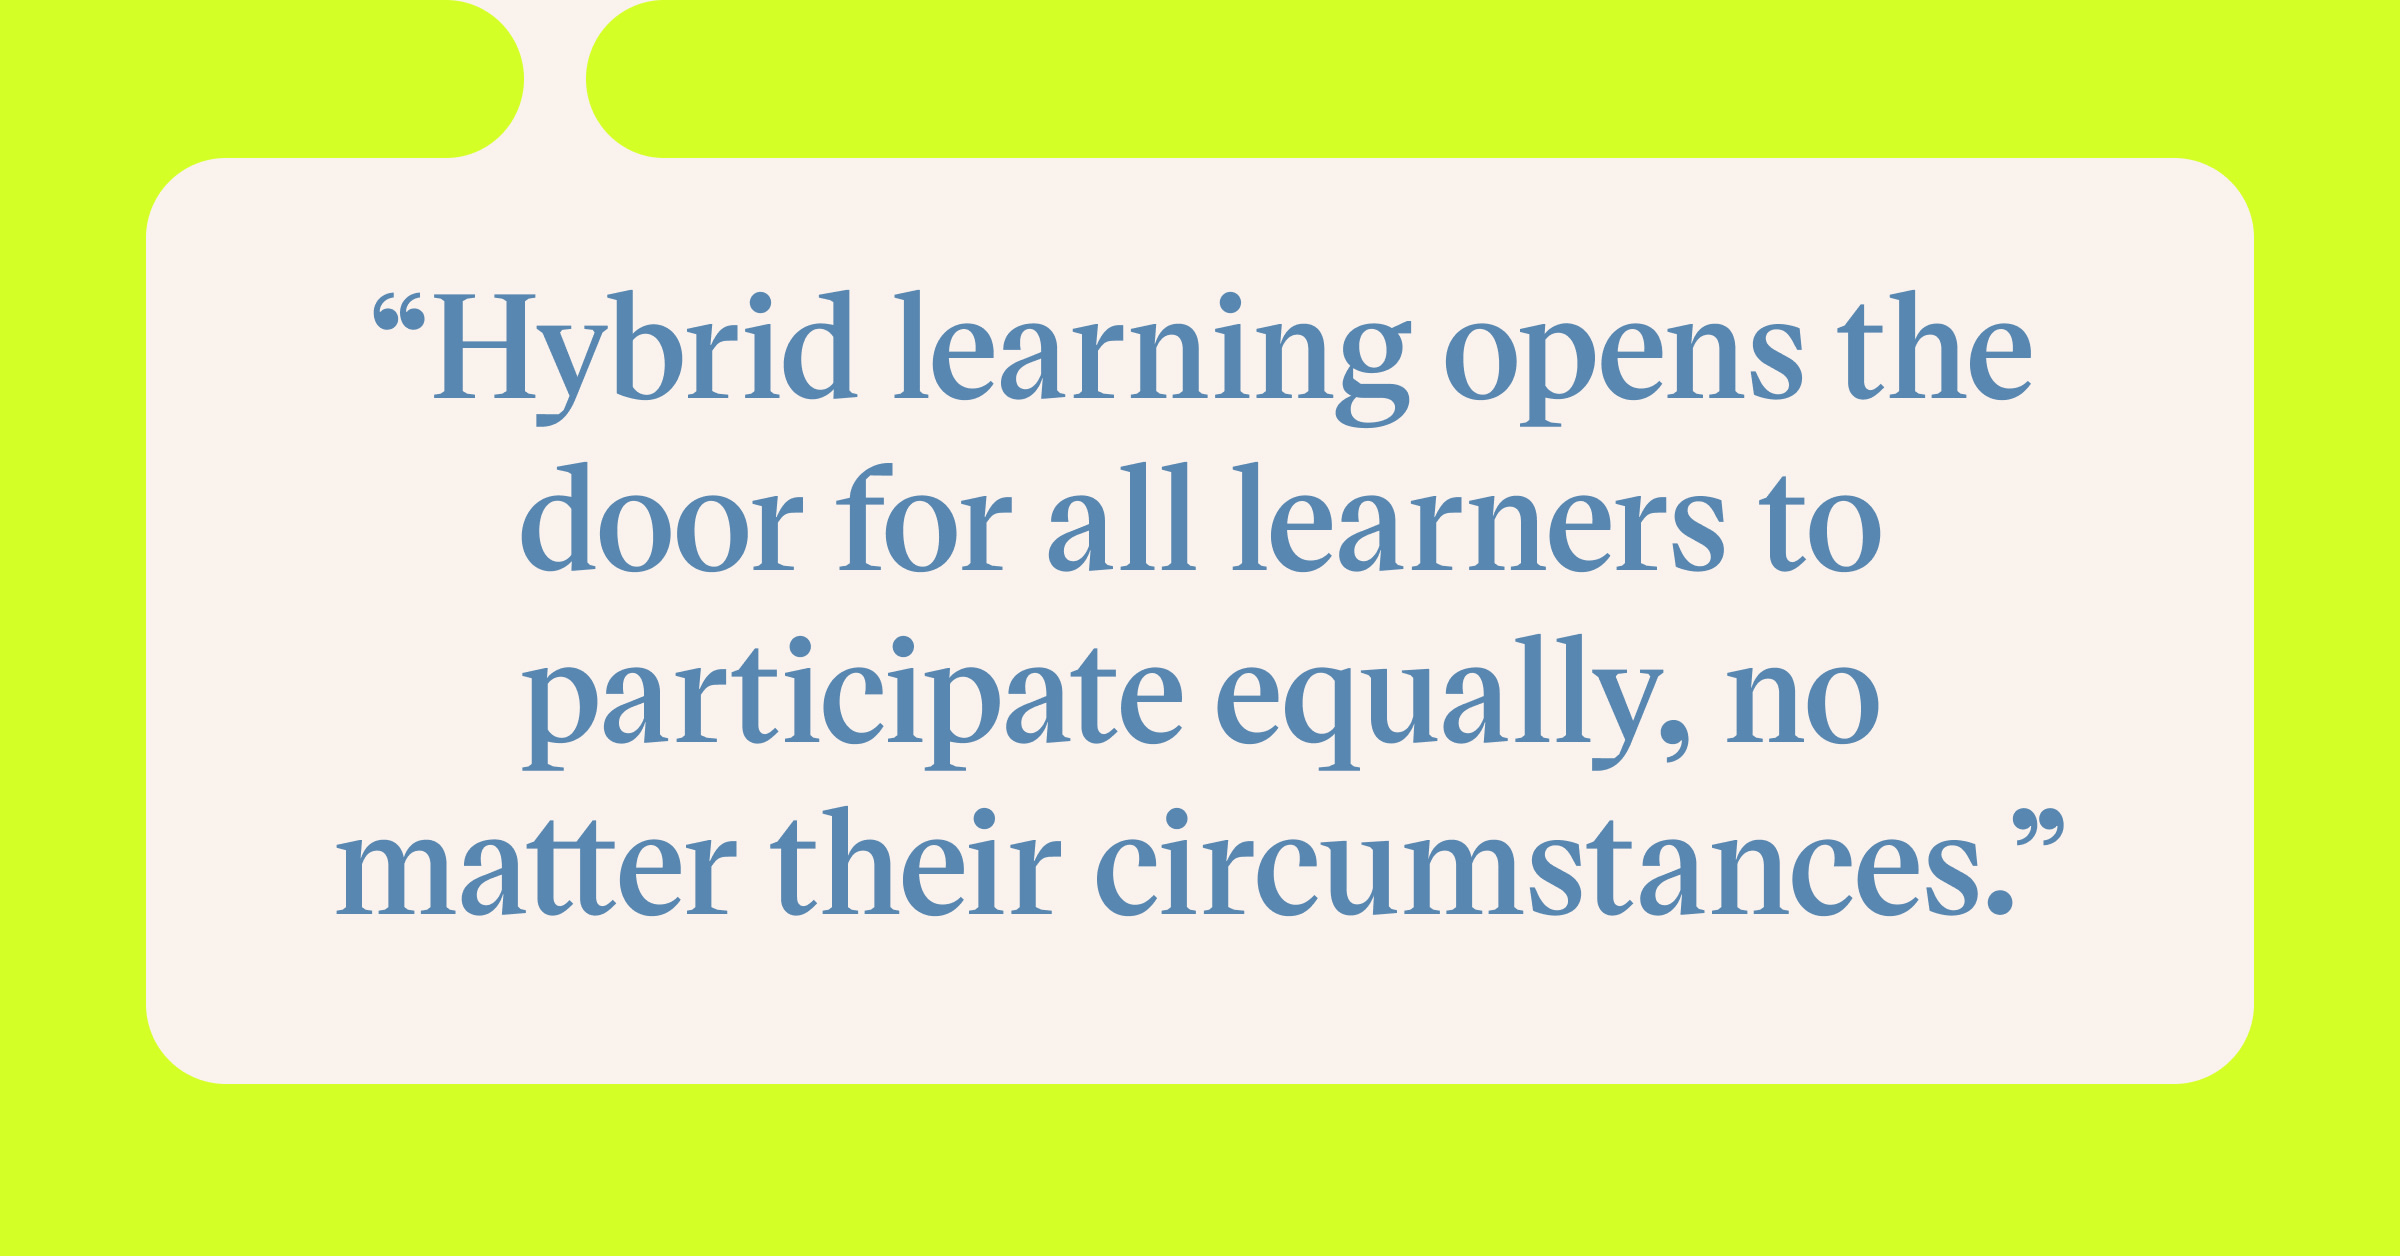 Pull quote with the text: Hybrid learning opens the door for all learners to participate equally, no matter their circumstances.